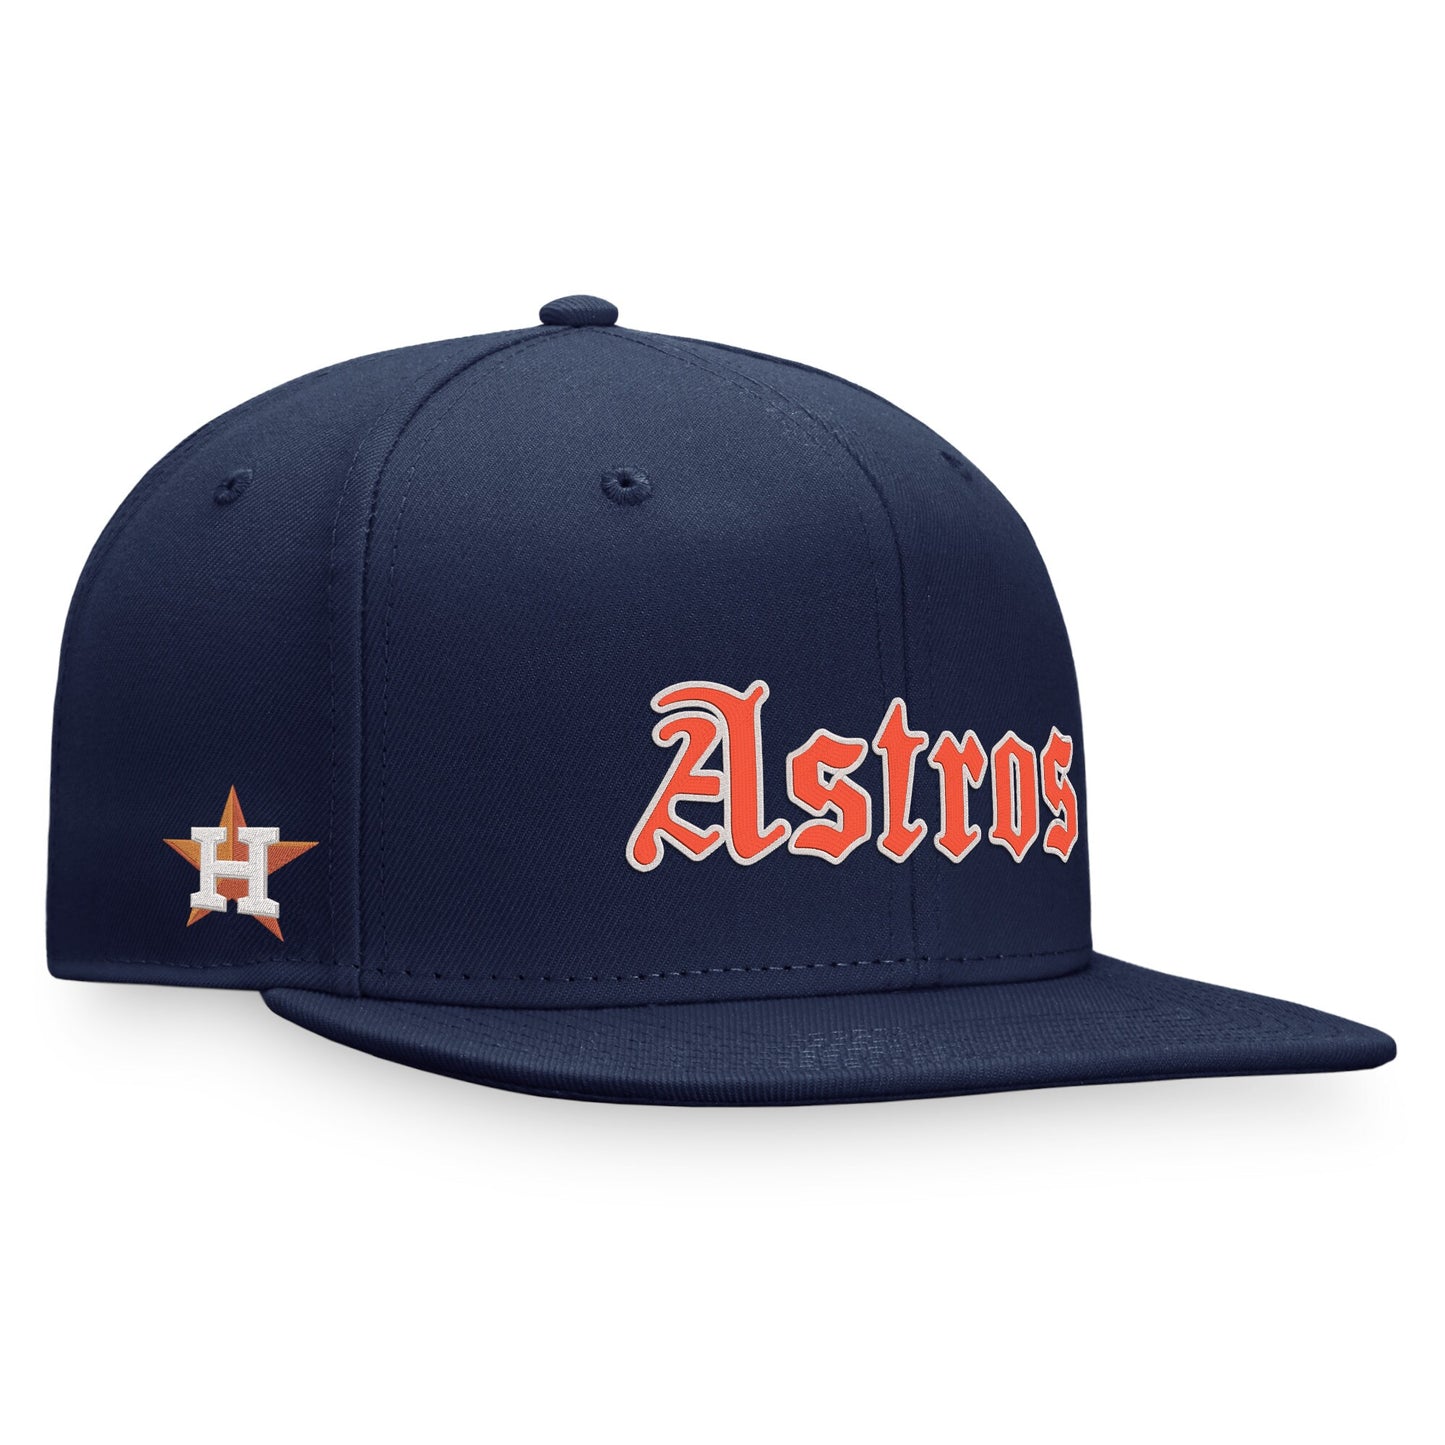 Houston Astros Fanatics Branded Gothic Script Fitted Hat - Navy